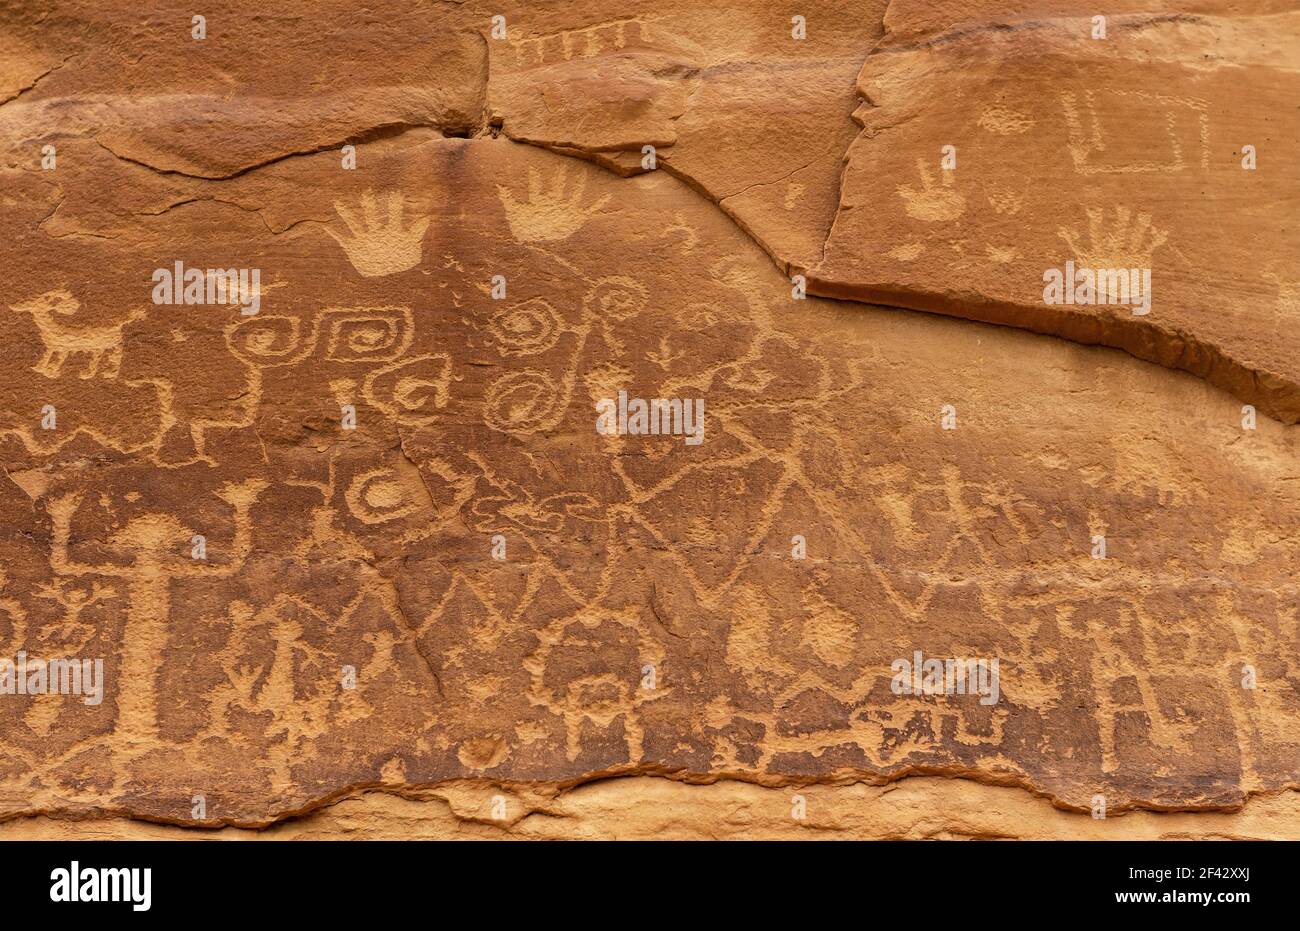 Petroglyph drawings on a rock face of the Pueblo civilization, Mesa Verde national park, Colorado, United States of America (USA) Stock Photo